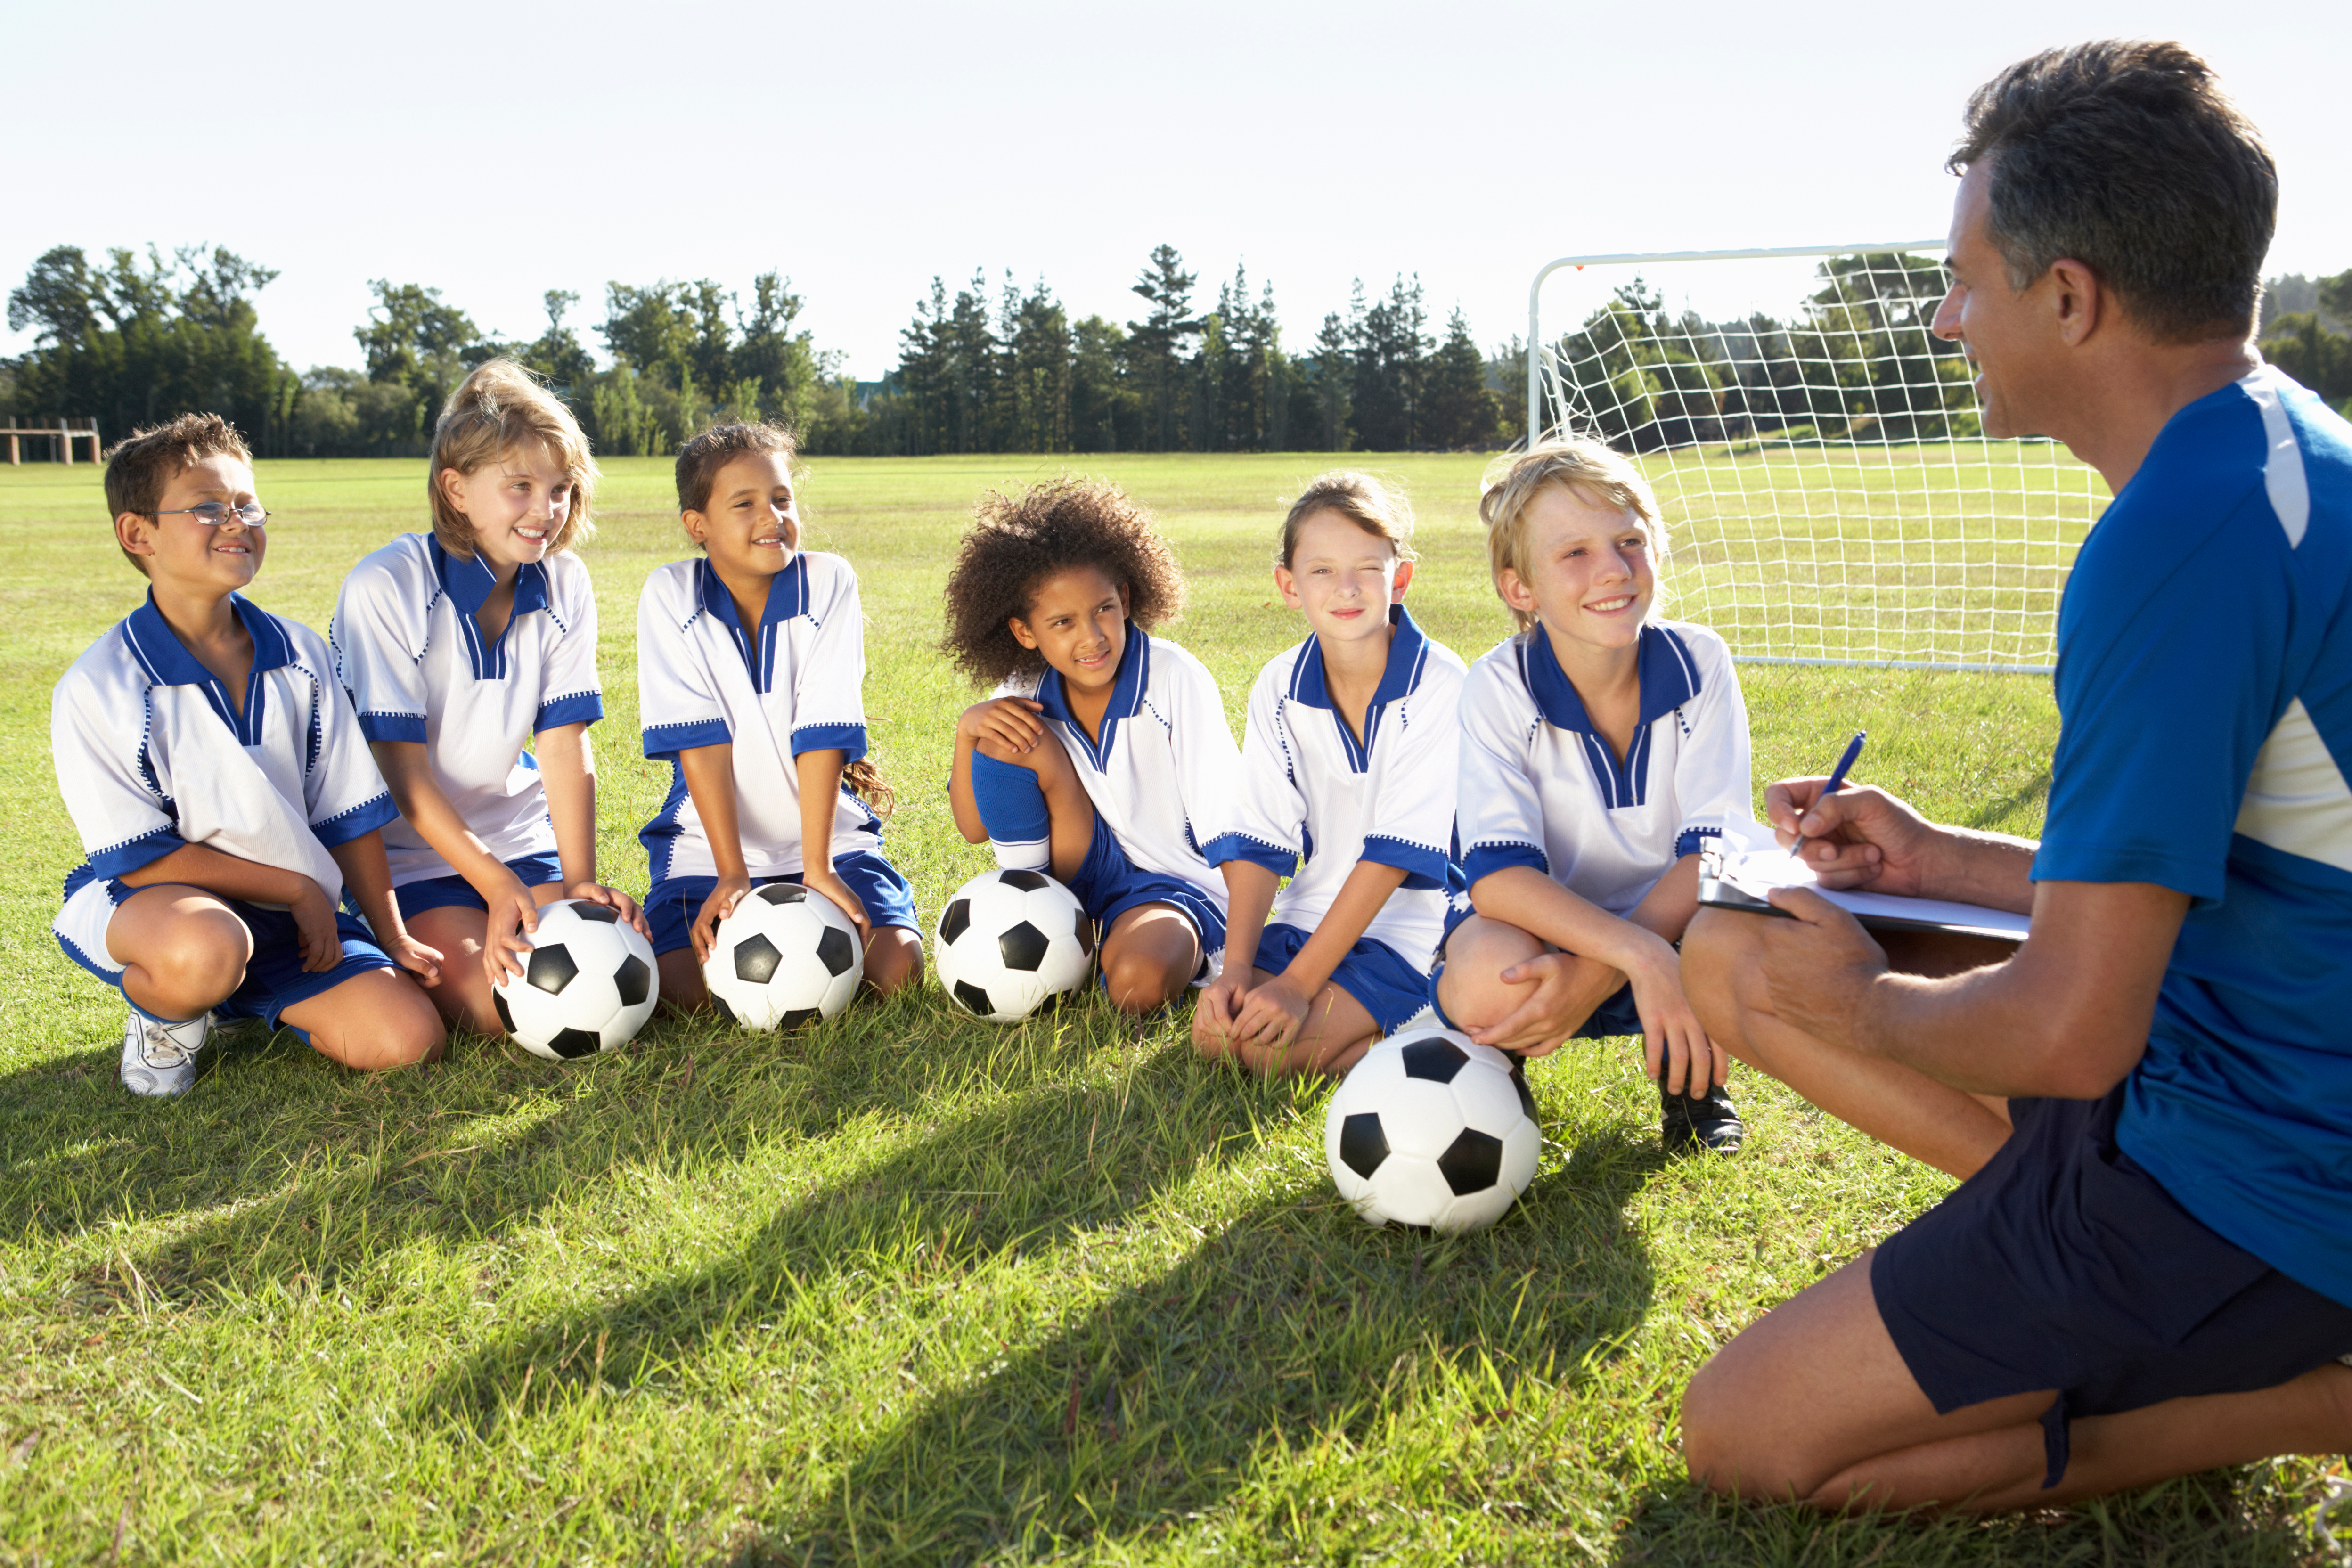 The Importance of Social Training for Coaches in Youth Sports and the Benefits of Offering It Online